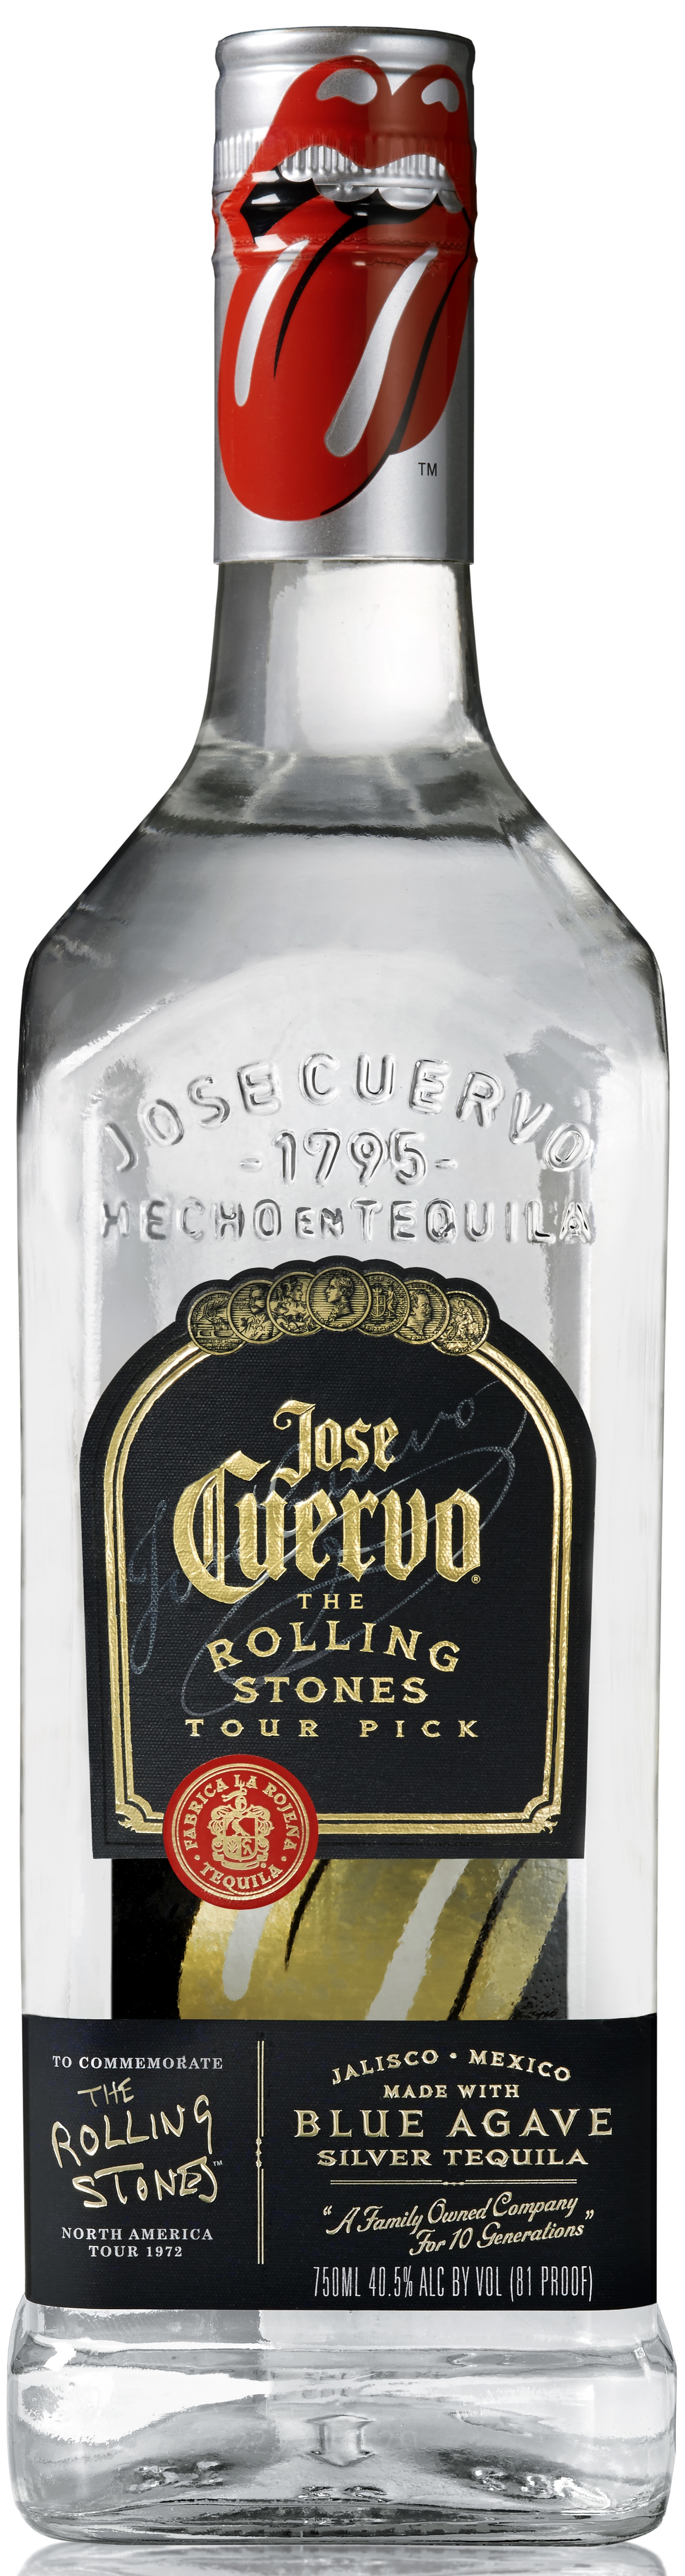 Jose Cuervo Special Edition Rolling Stones Bottle, $17